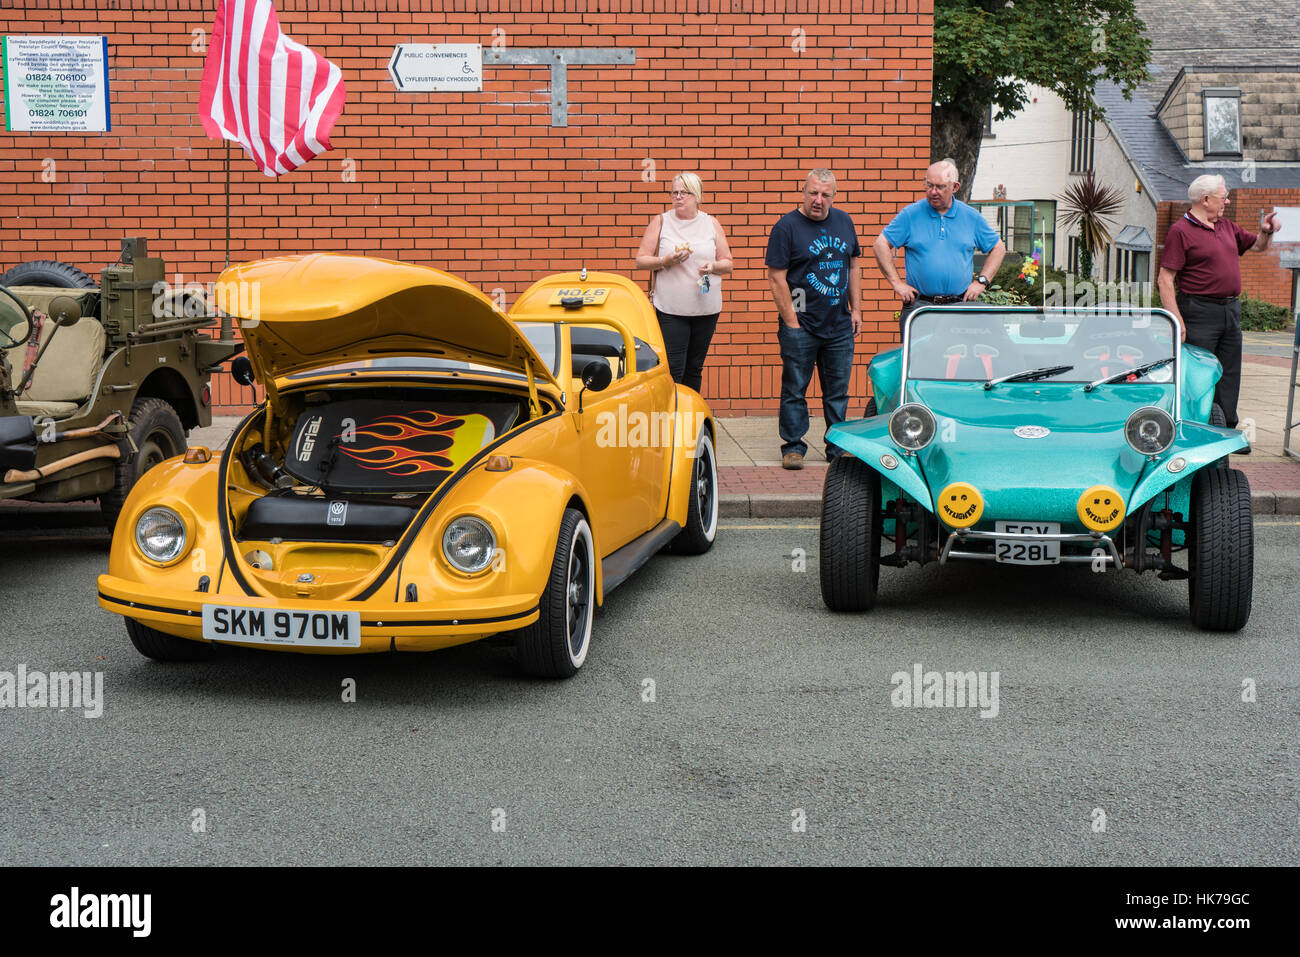 VW Beach Buggy and surfer Beetle Speedster at the Prestatyn Flower Show Stock Photo